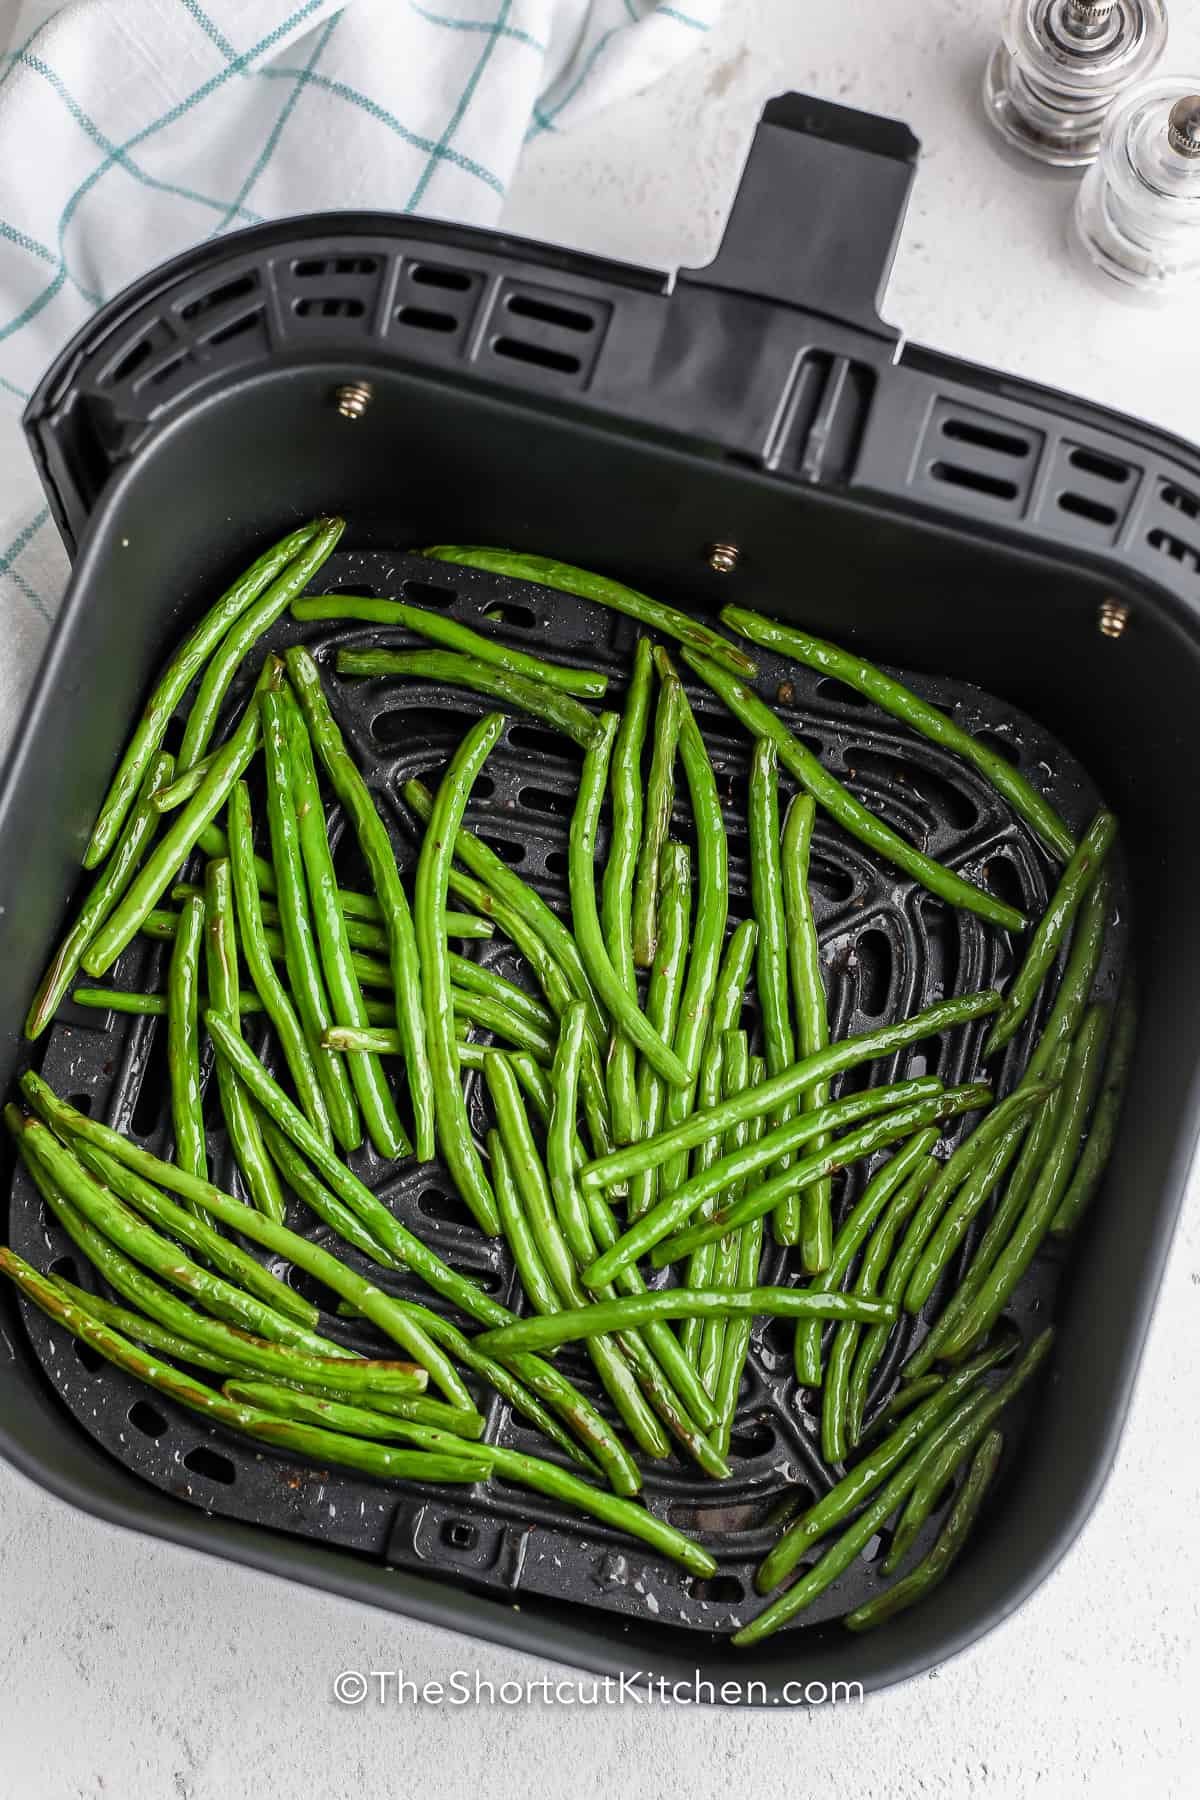 Green beans cooked in an air fryer basket